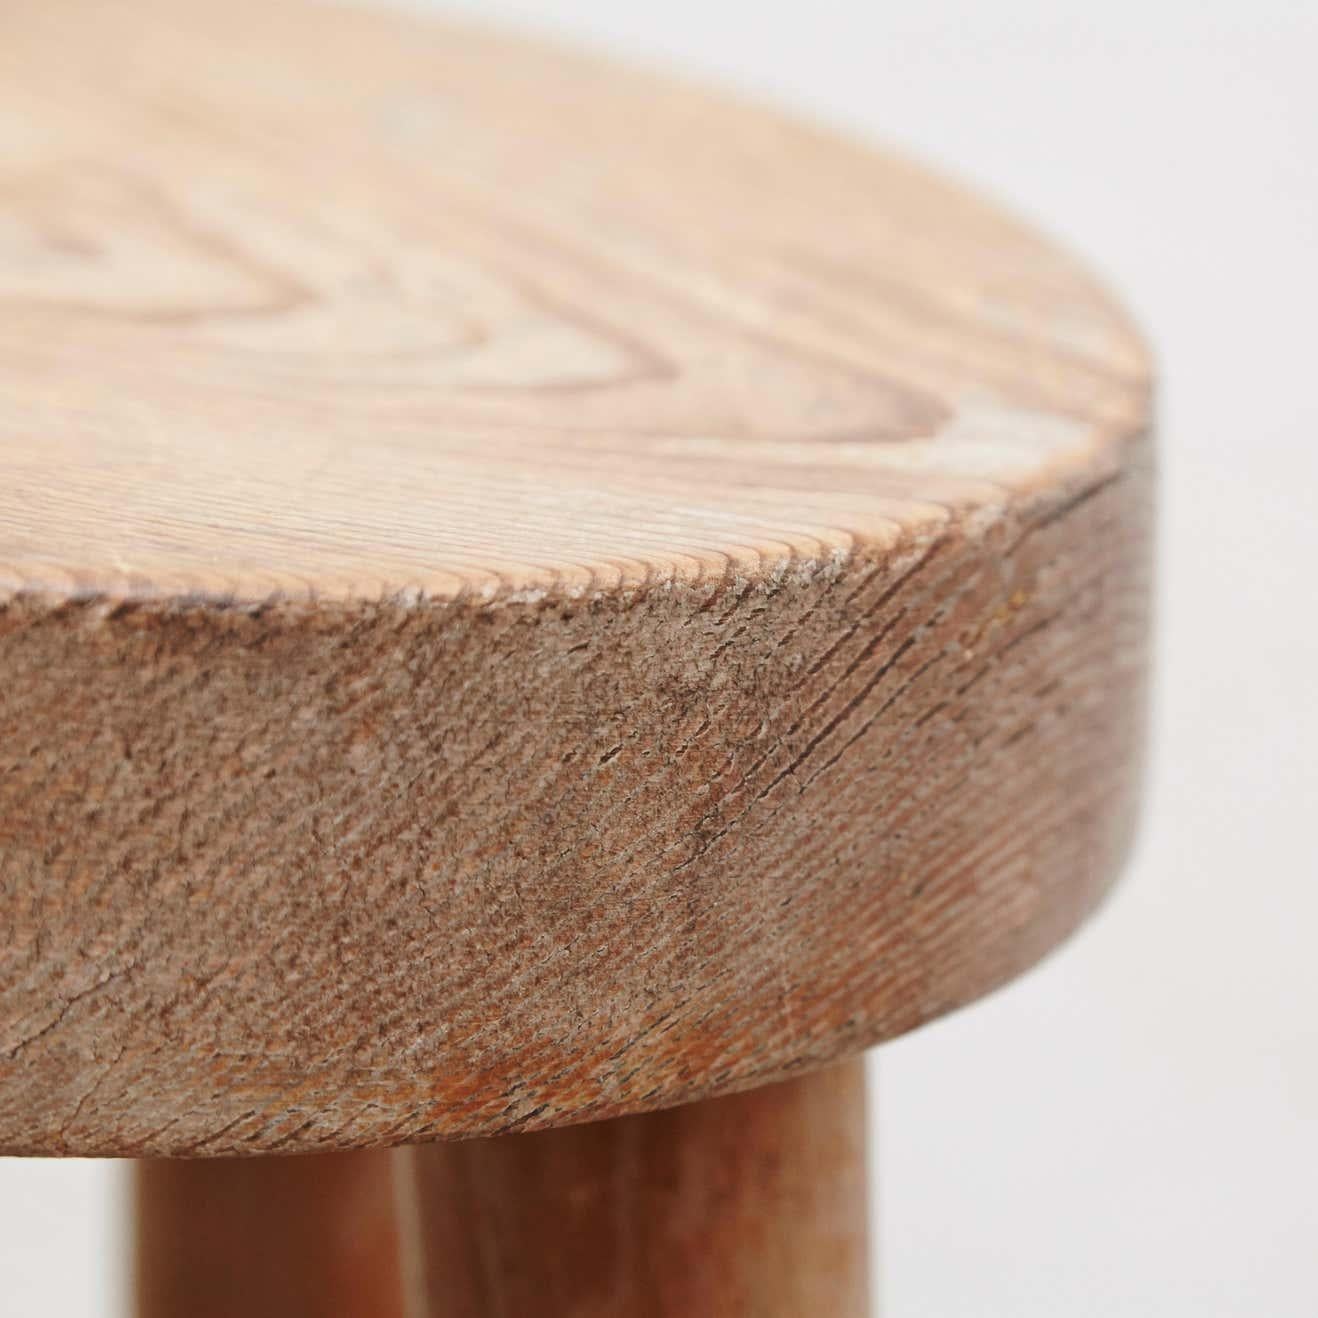 Pine Charlotte Perriand Wood Stool for Les Arcs, circa 1960 For Sale